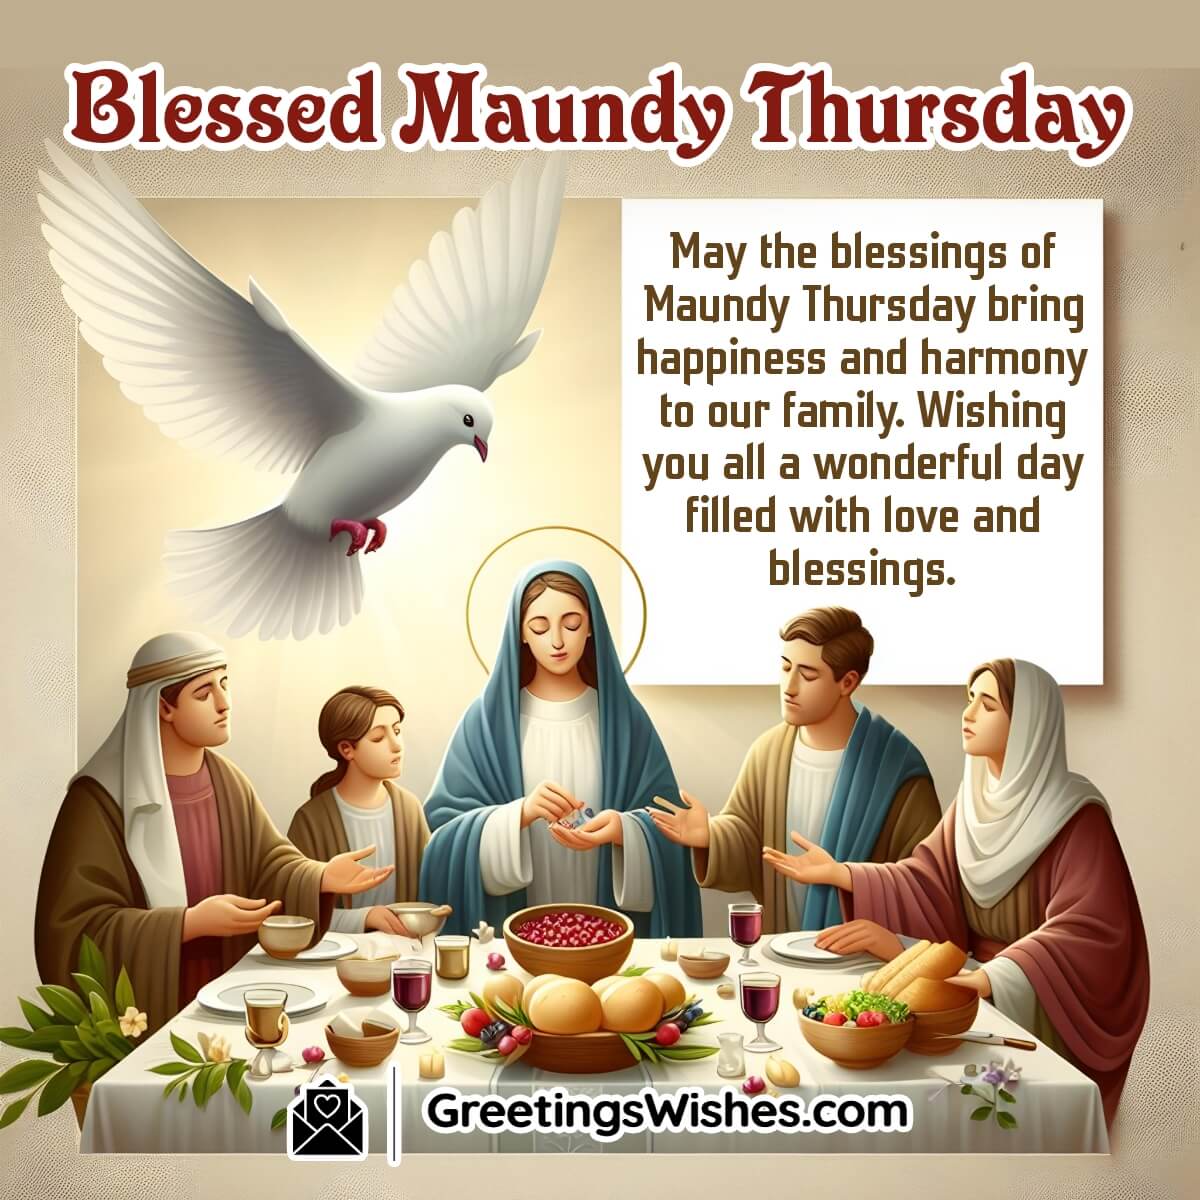 Blessed Maundy Thursday Wish For Family